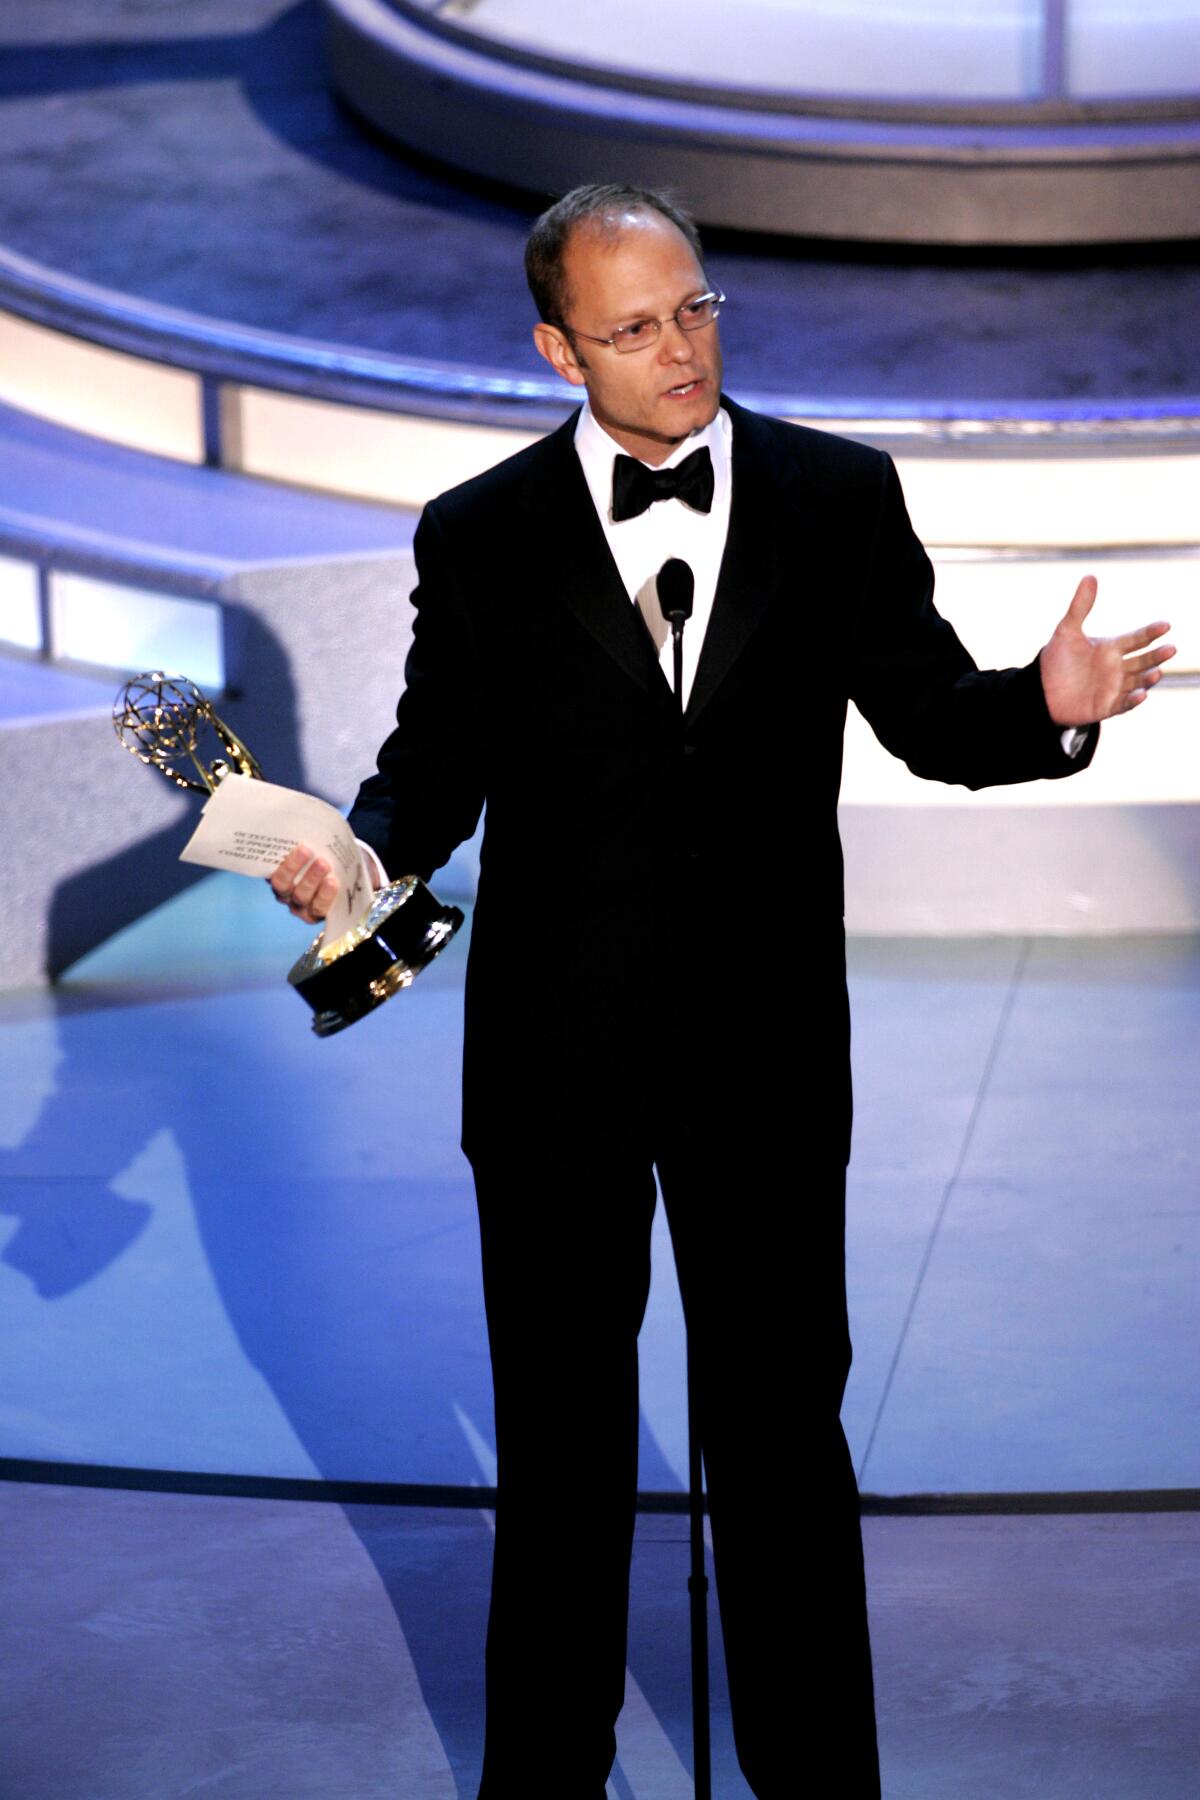 David Hyde Pierce wears a tuxedo and gestures while holding his Emmy onstage at the 2004 ceremony.